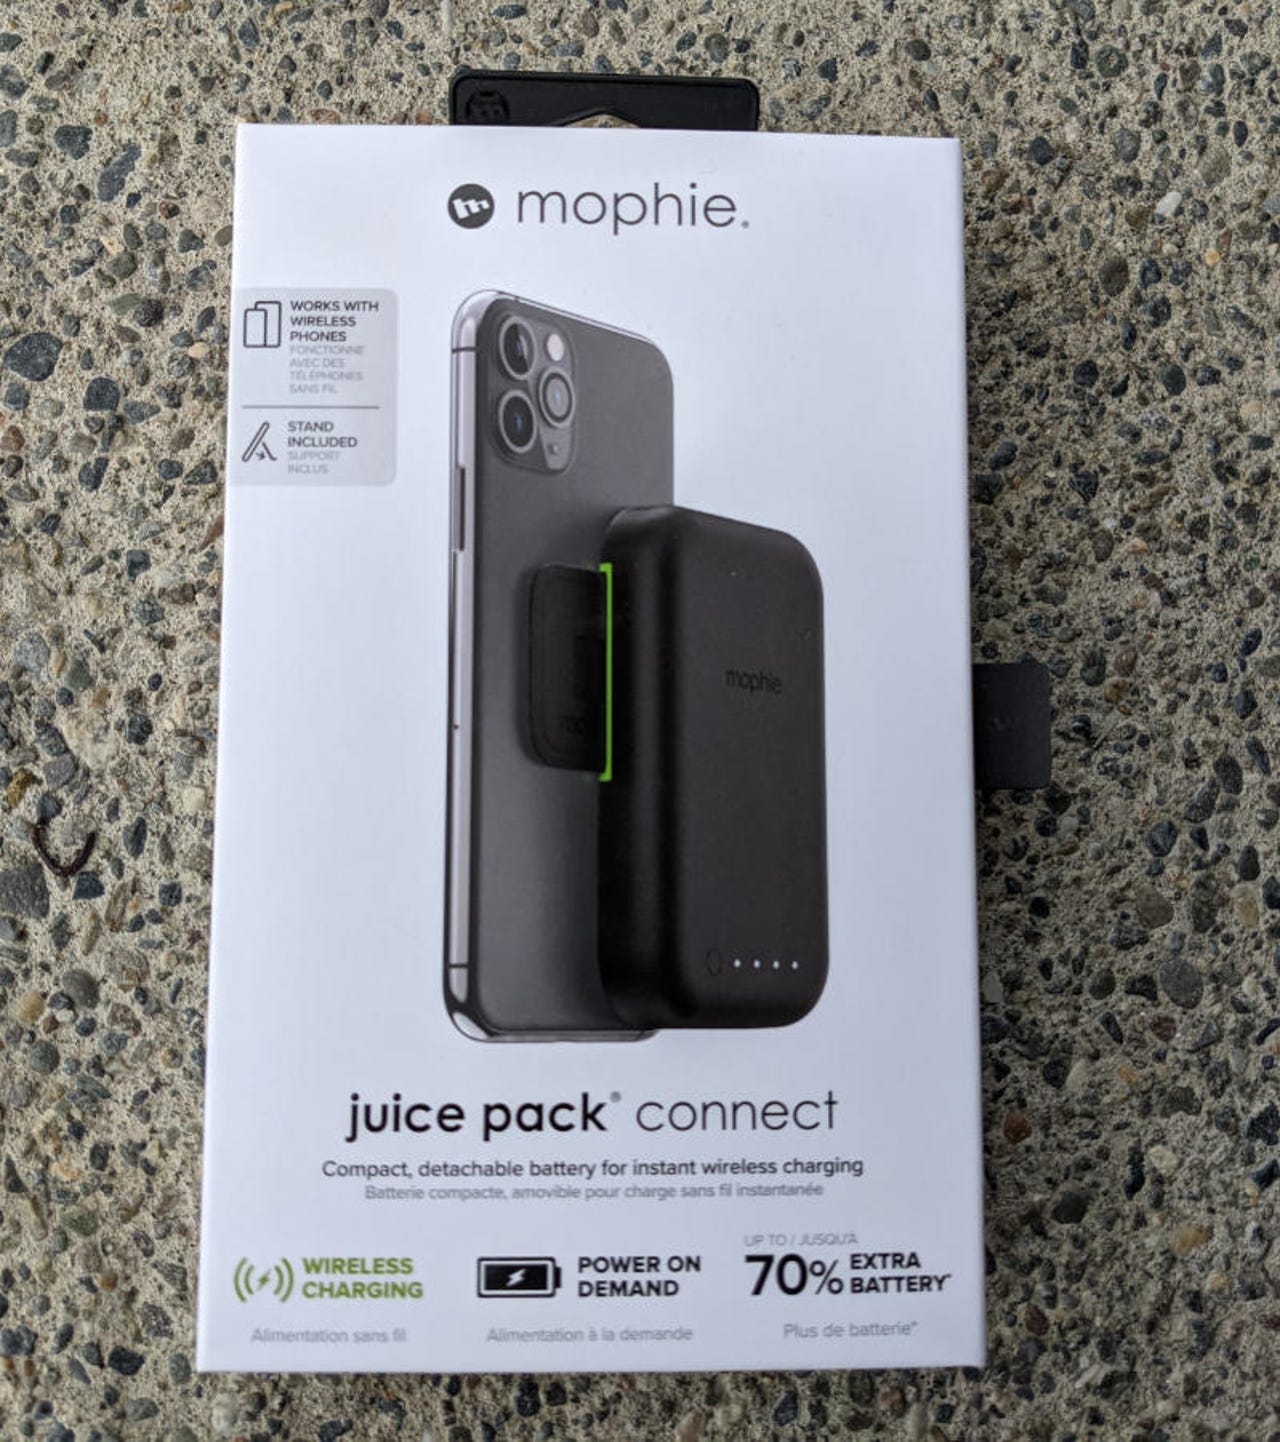 mophie-juice-pack-connect-1.jpg